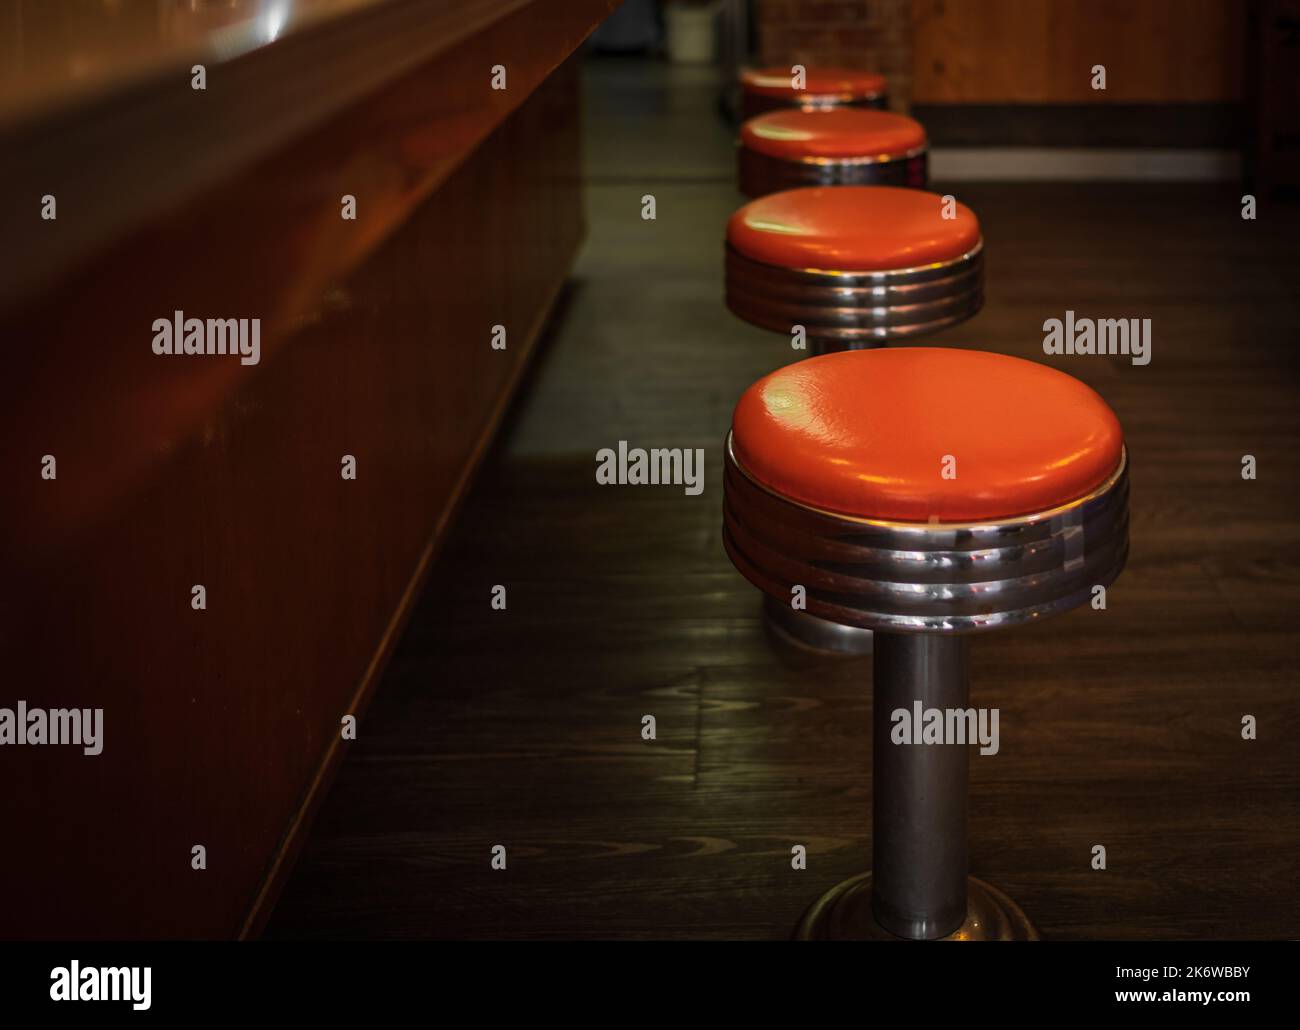 Vintage stools in the restaurant. Row vintage stools in front of wooden counter inside a vintage style bar. A row of four shiny red vinyl stools. Nobo Stock Photo